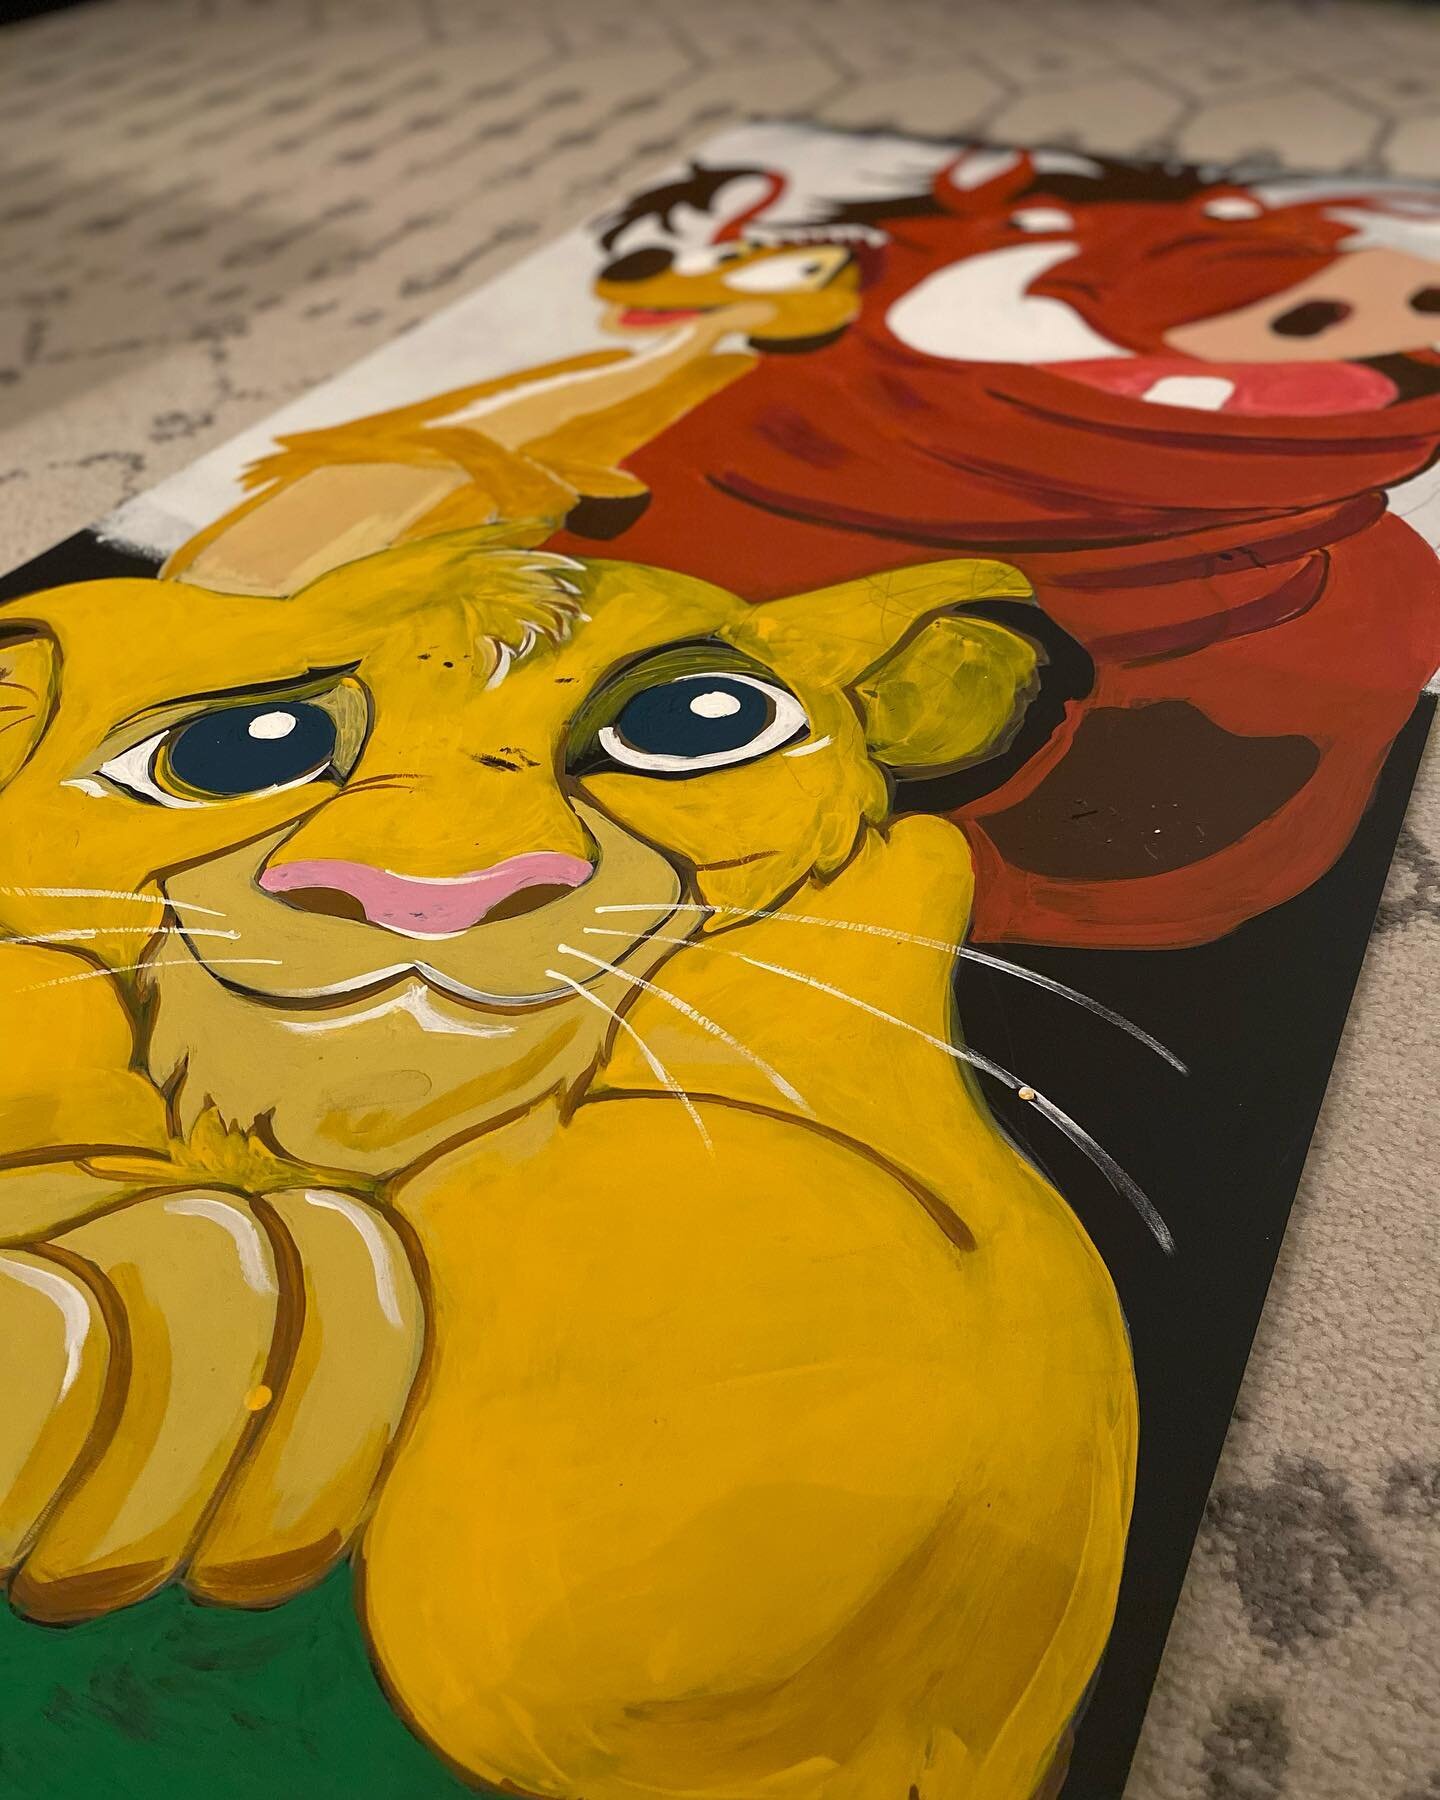 Late nights, early mornings!
4FT PROPS now available!
#woodworking #woodpainting #eventdesign #eventprops #lionkingparty #simba #lionking #propstyling #atlanta #balloondecor #partyplanner #artist